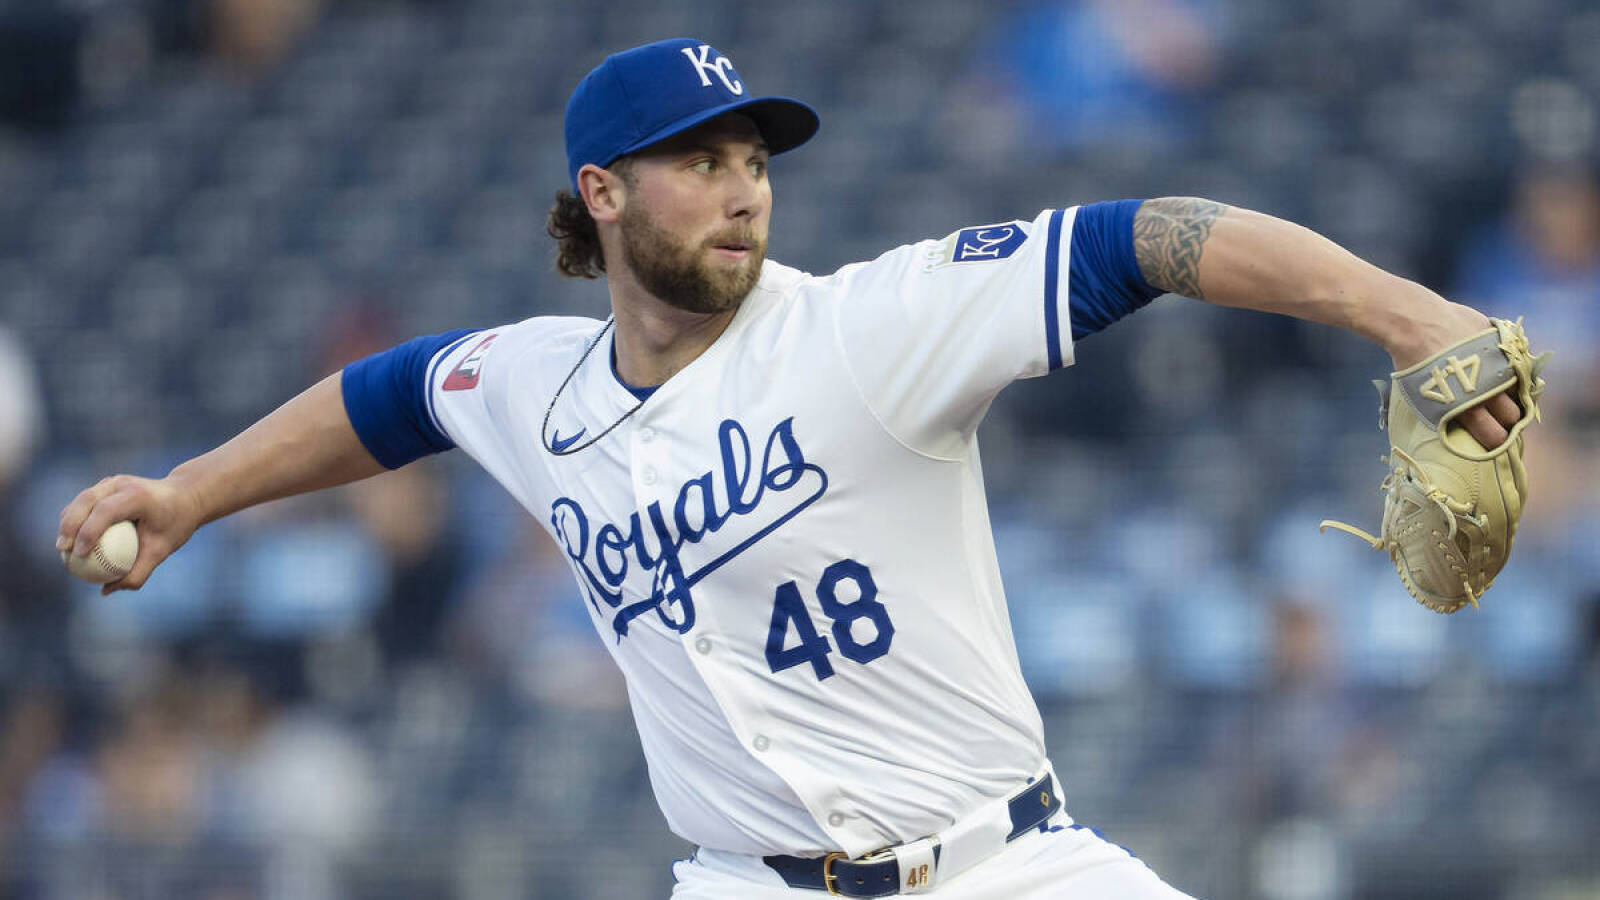 Royals hopeful right-hander can return to rotation soon